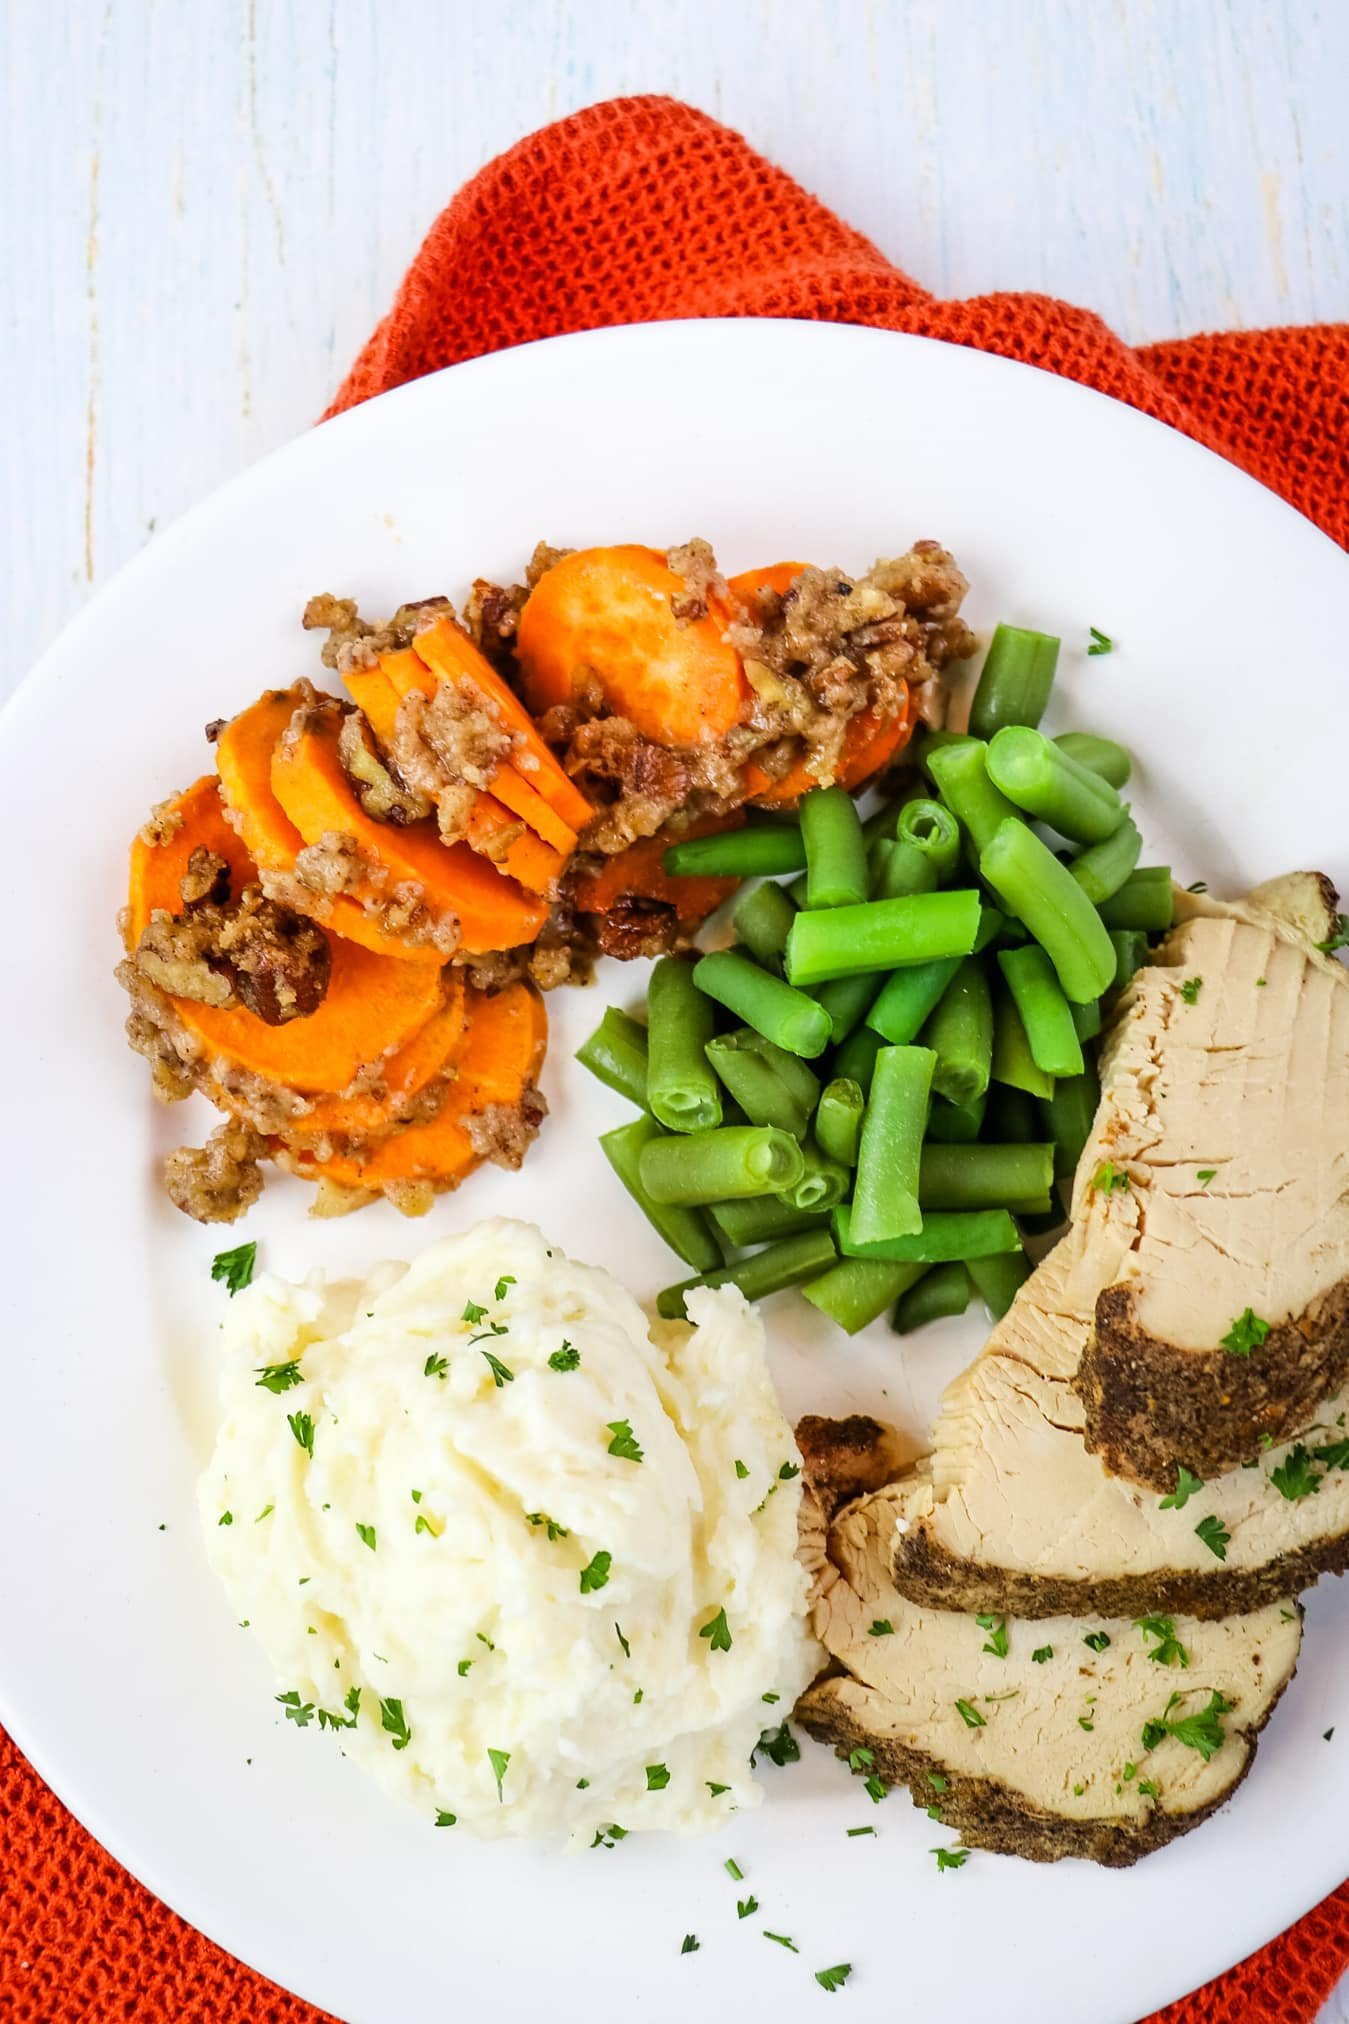 Hasselback sweet potatoes on plate with turkey, mashed potatoes and green beans.